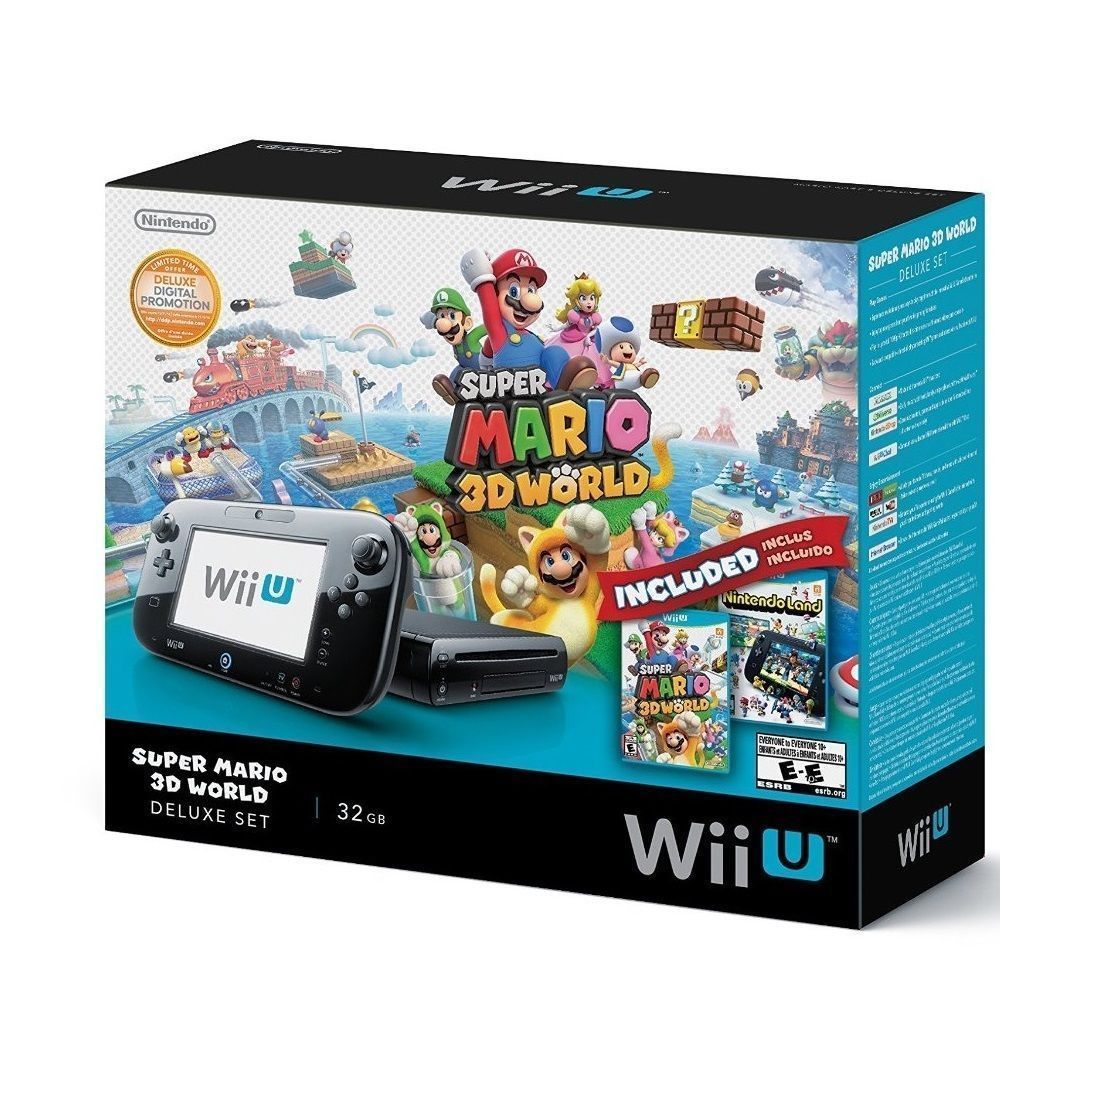 Wii U Hdmi Cable Ebay Download For Windows 8 64bit